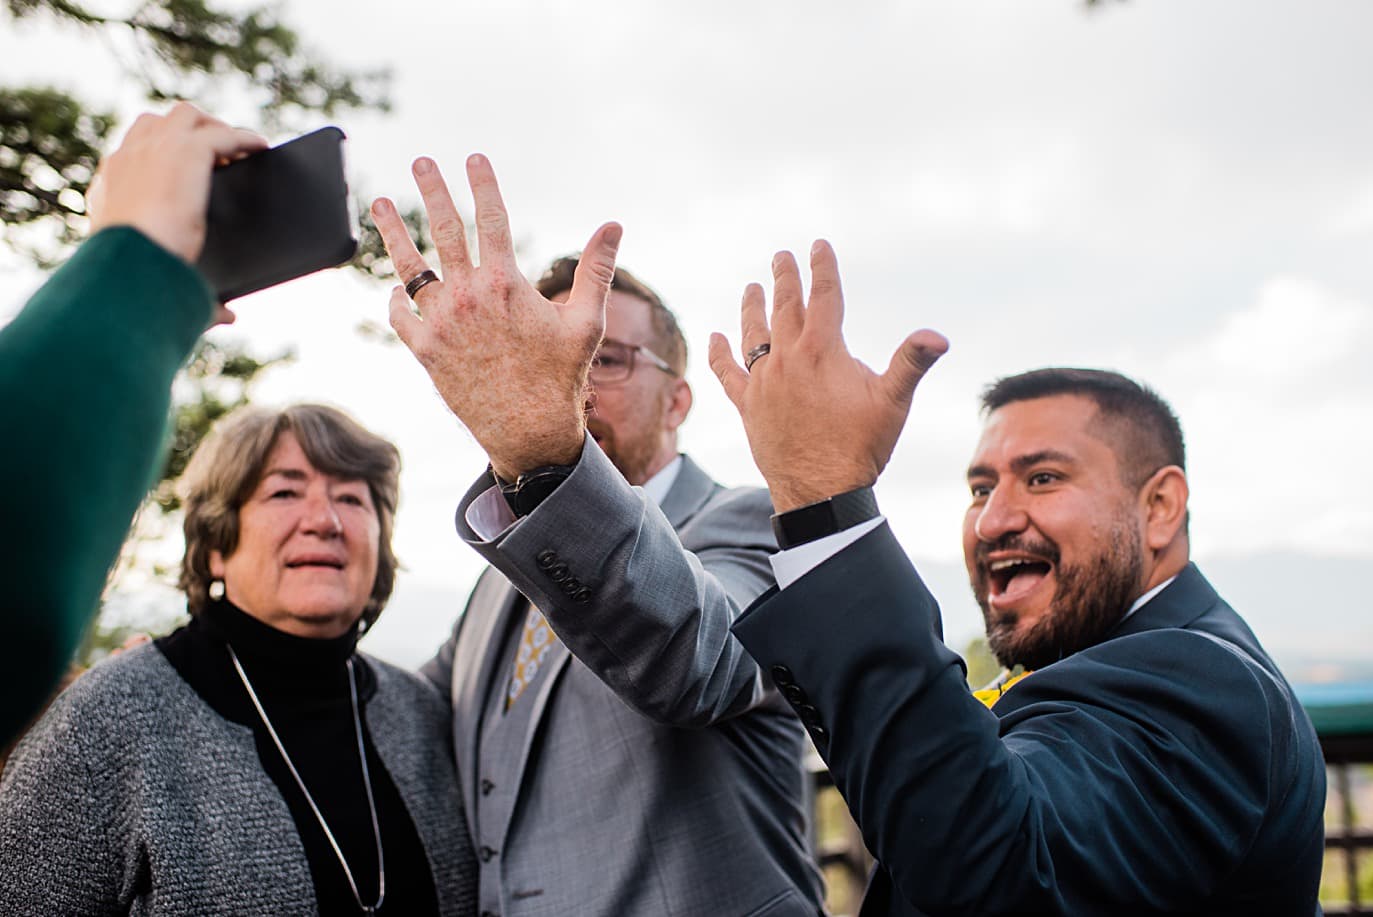 grooms show off wedding rings to guest on zoom at Panorama point during LGBTQ wedding by Colorado LGBT photographer Jennie Crate